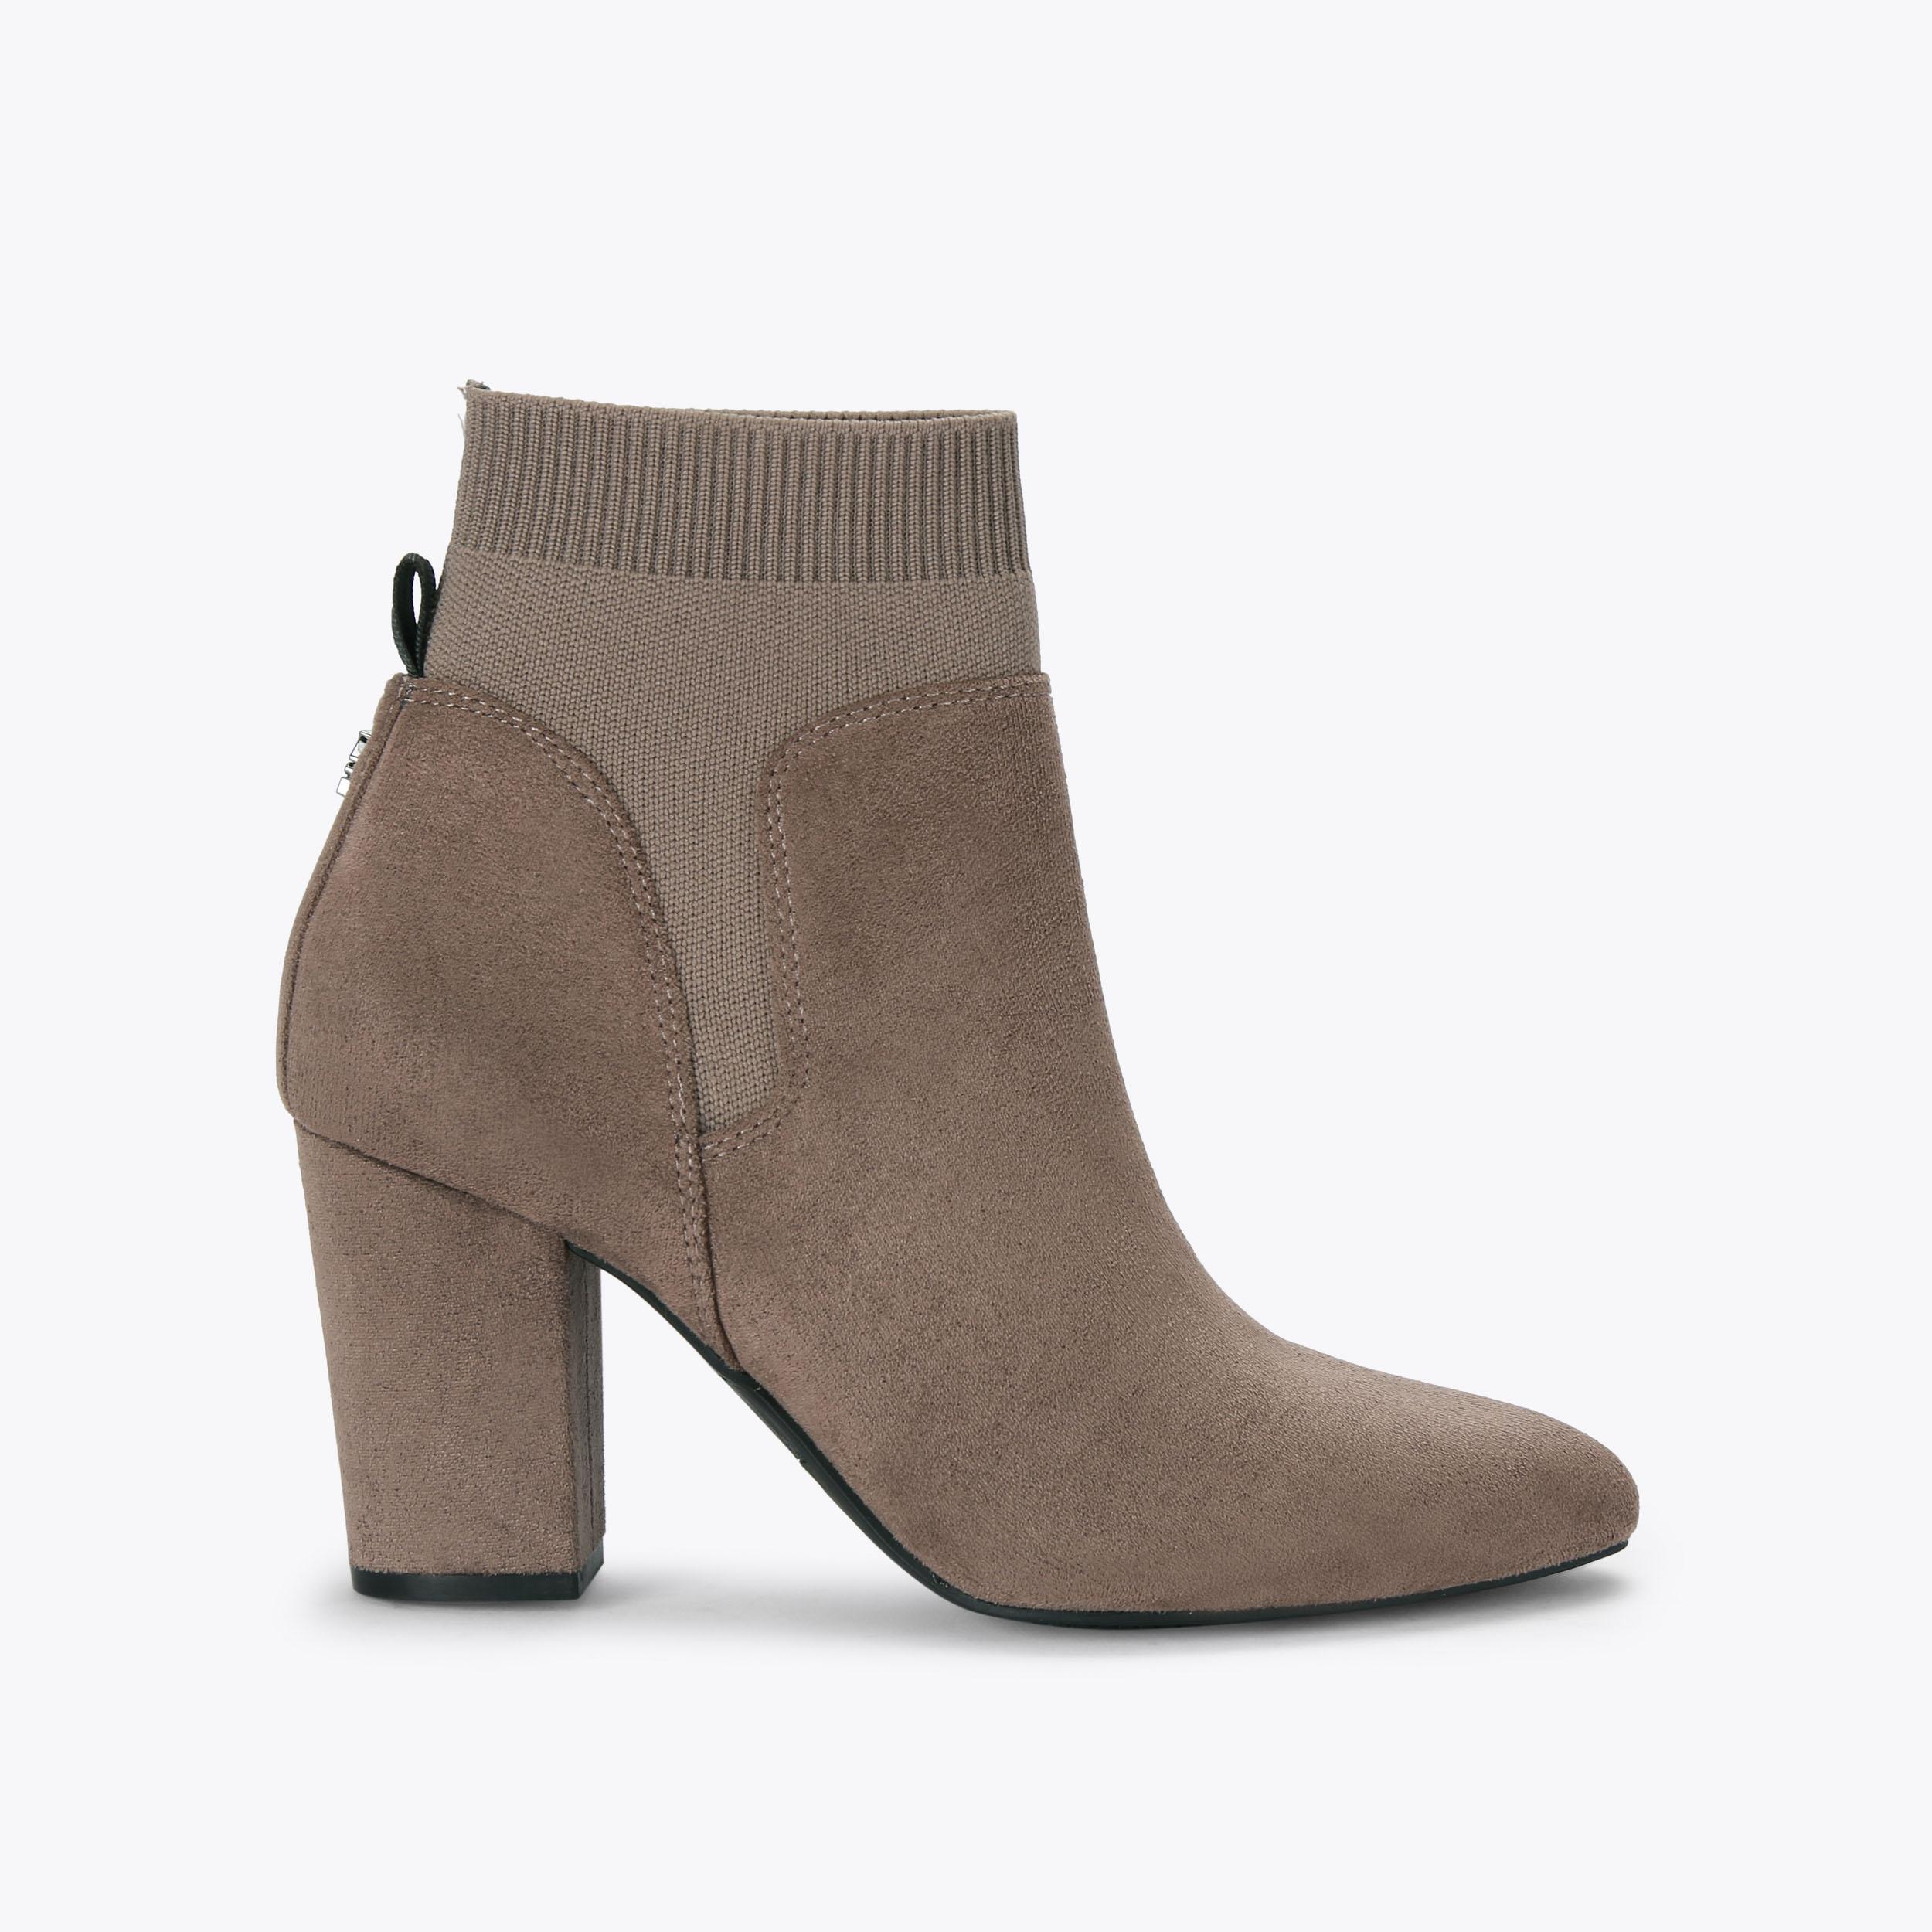 TOBI2 Taupe Ankle Boots by KG KURT GEIGER